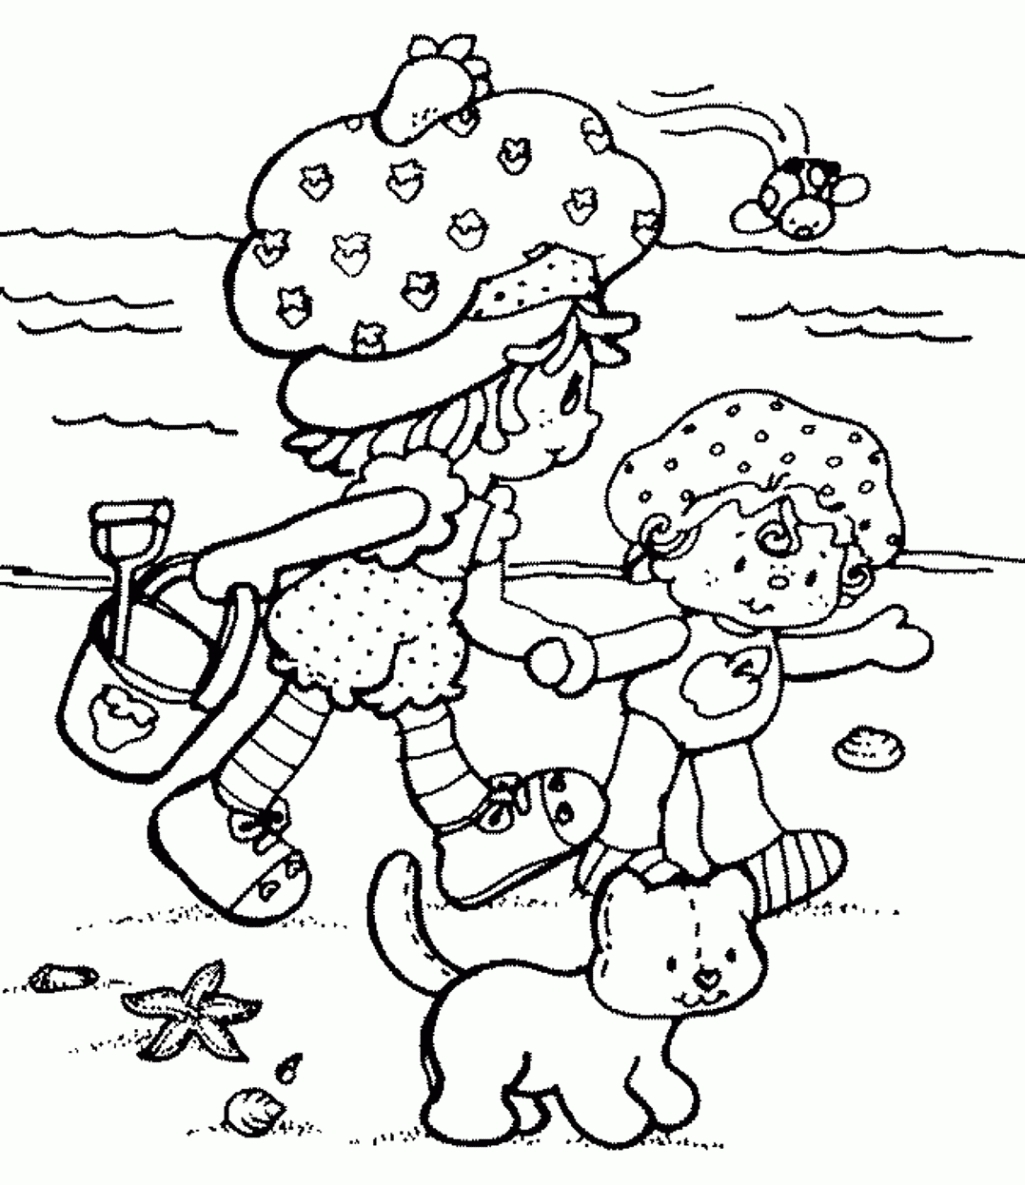 27 Summer season coloring pages part 2 | Free Printables